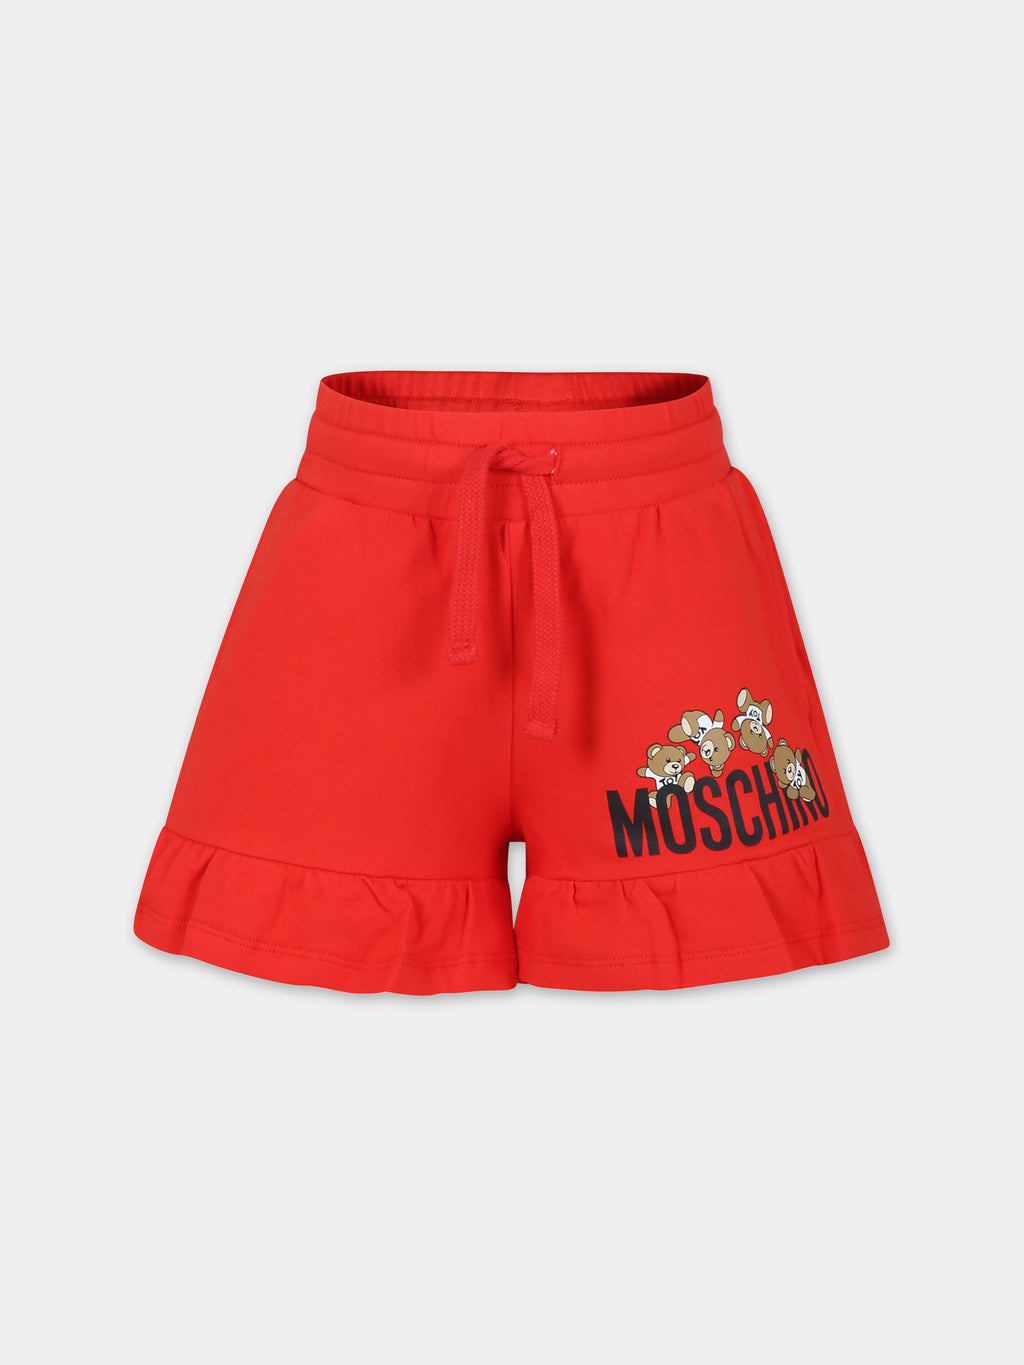 Red shorts for girl with Teddy Bear and logo